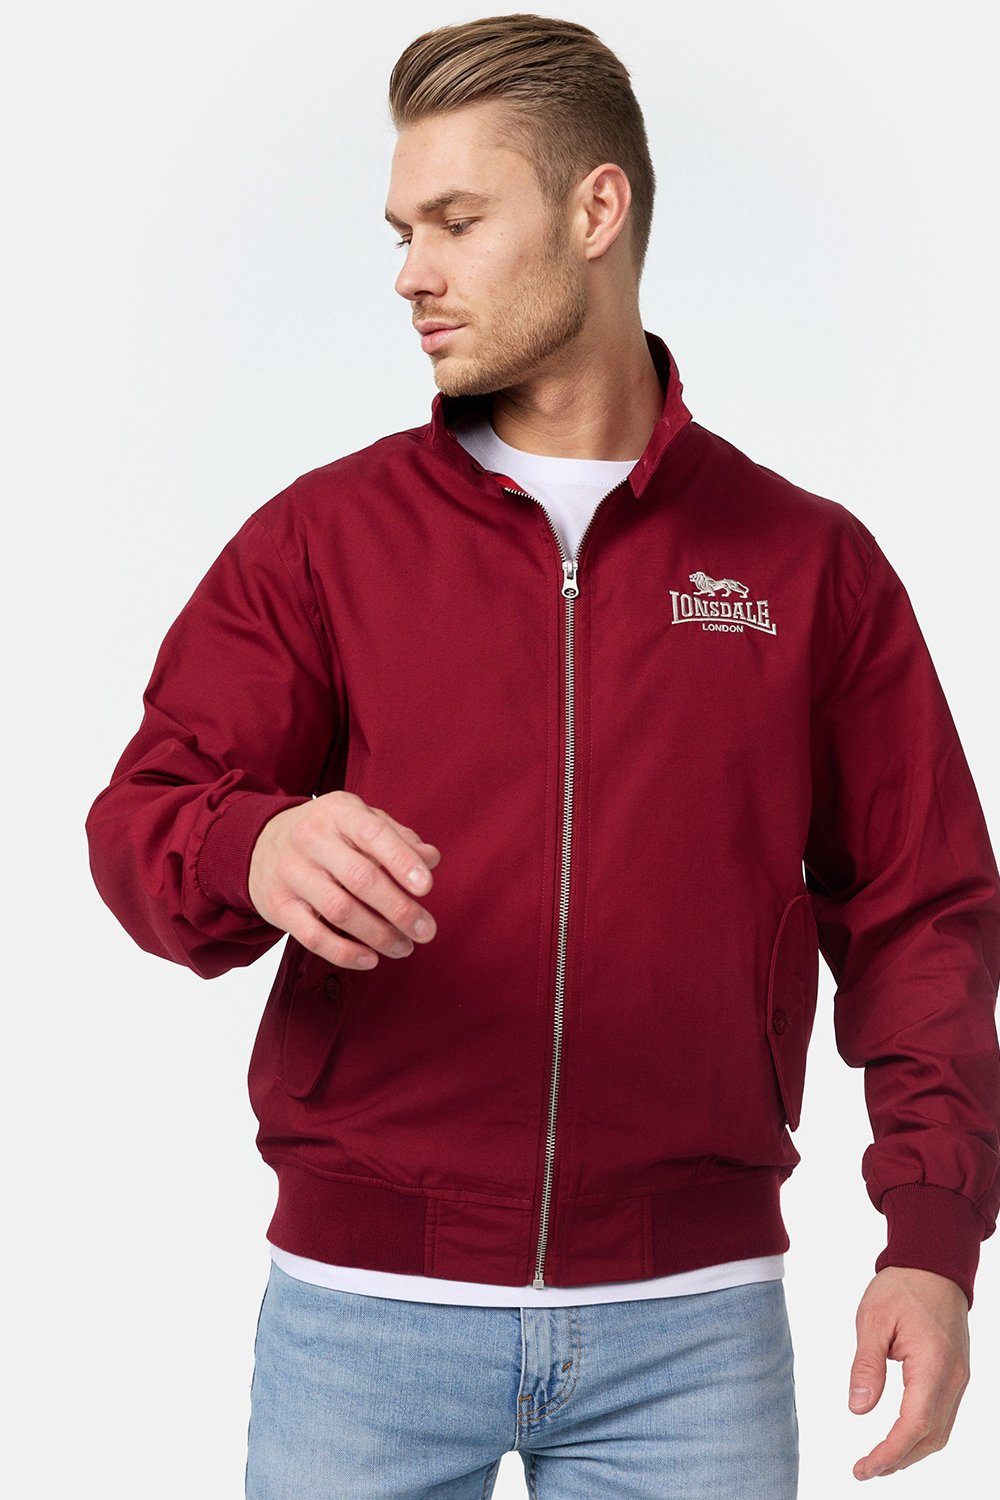 Lonsdale Allwetterjacke CLASSIC Cherry Red